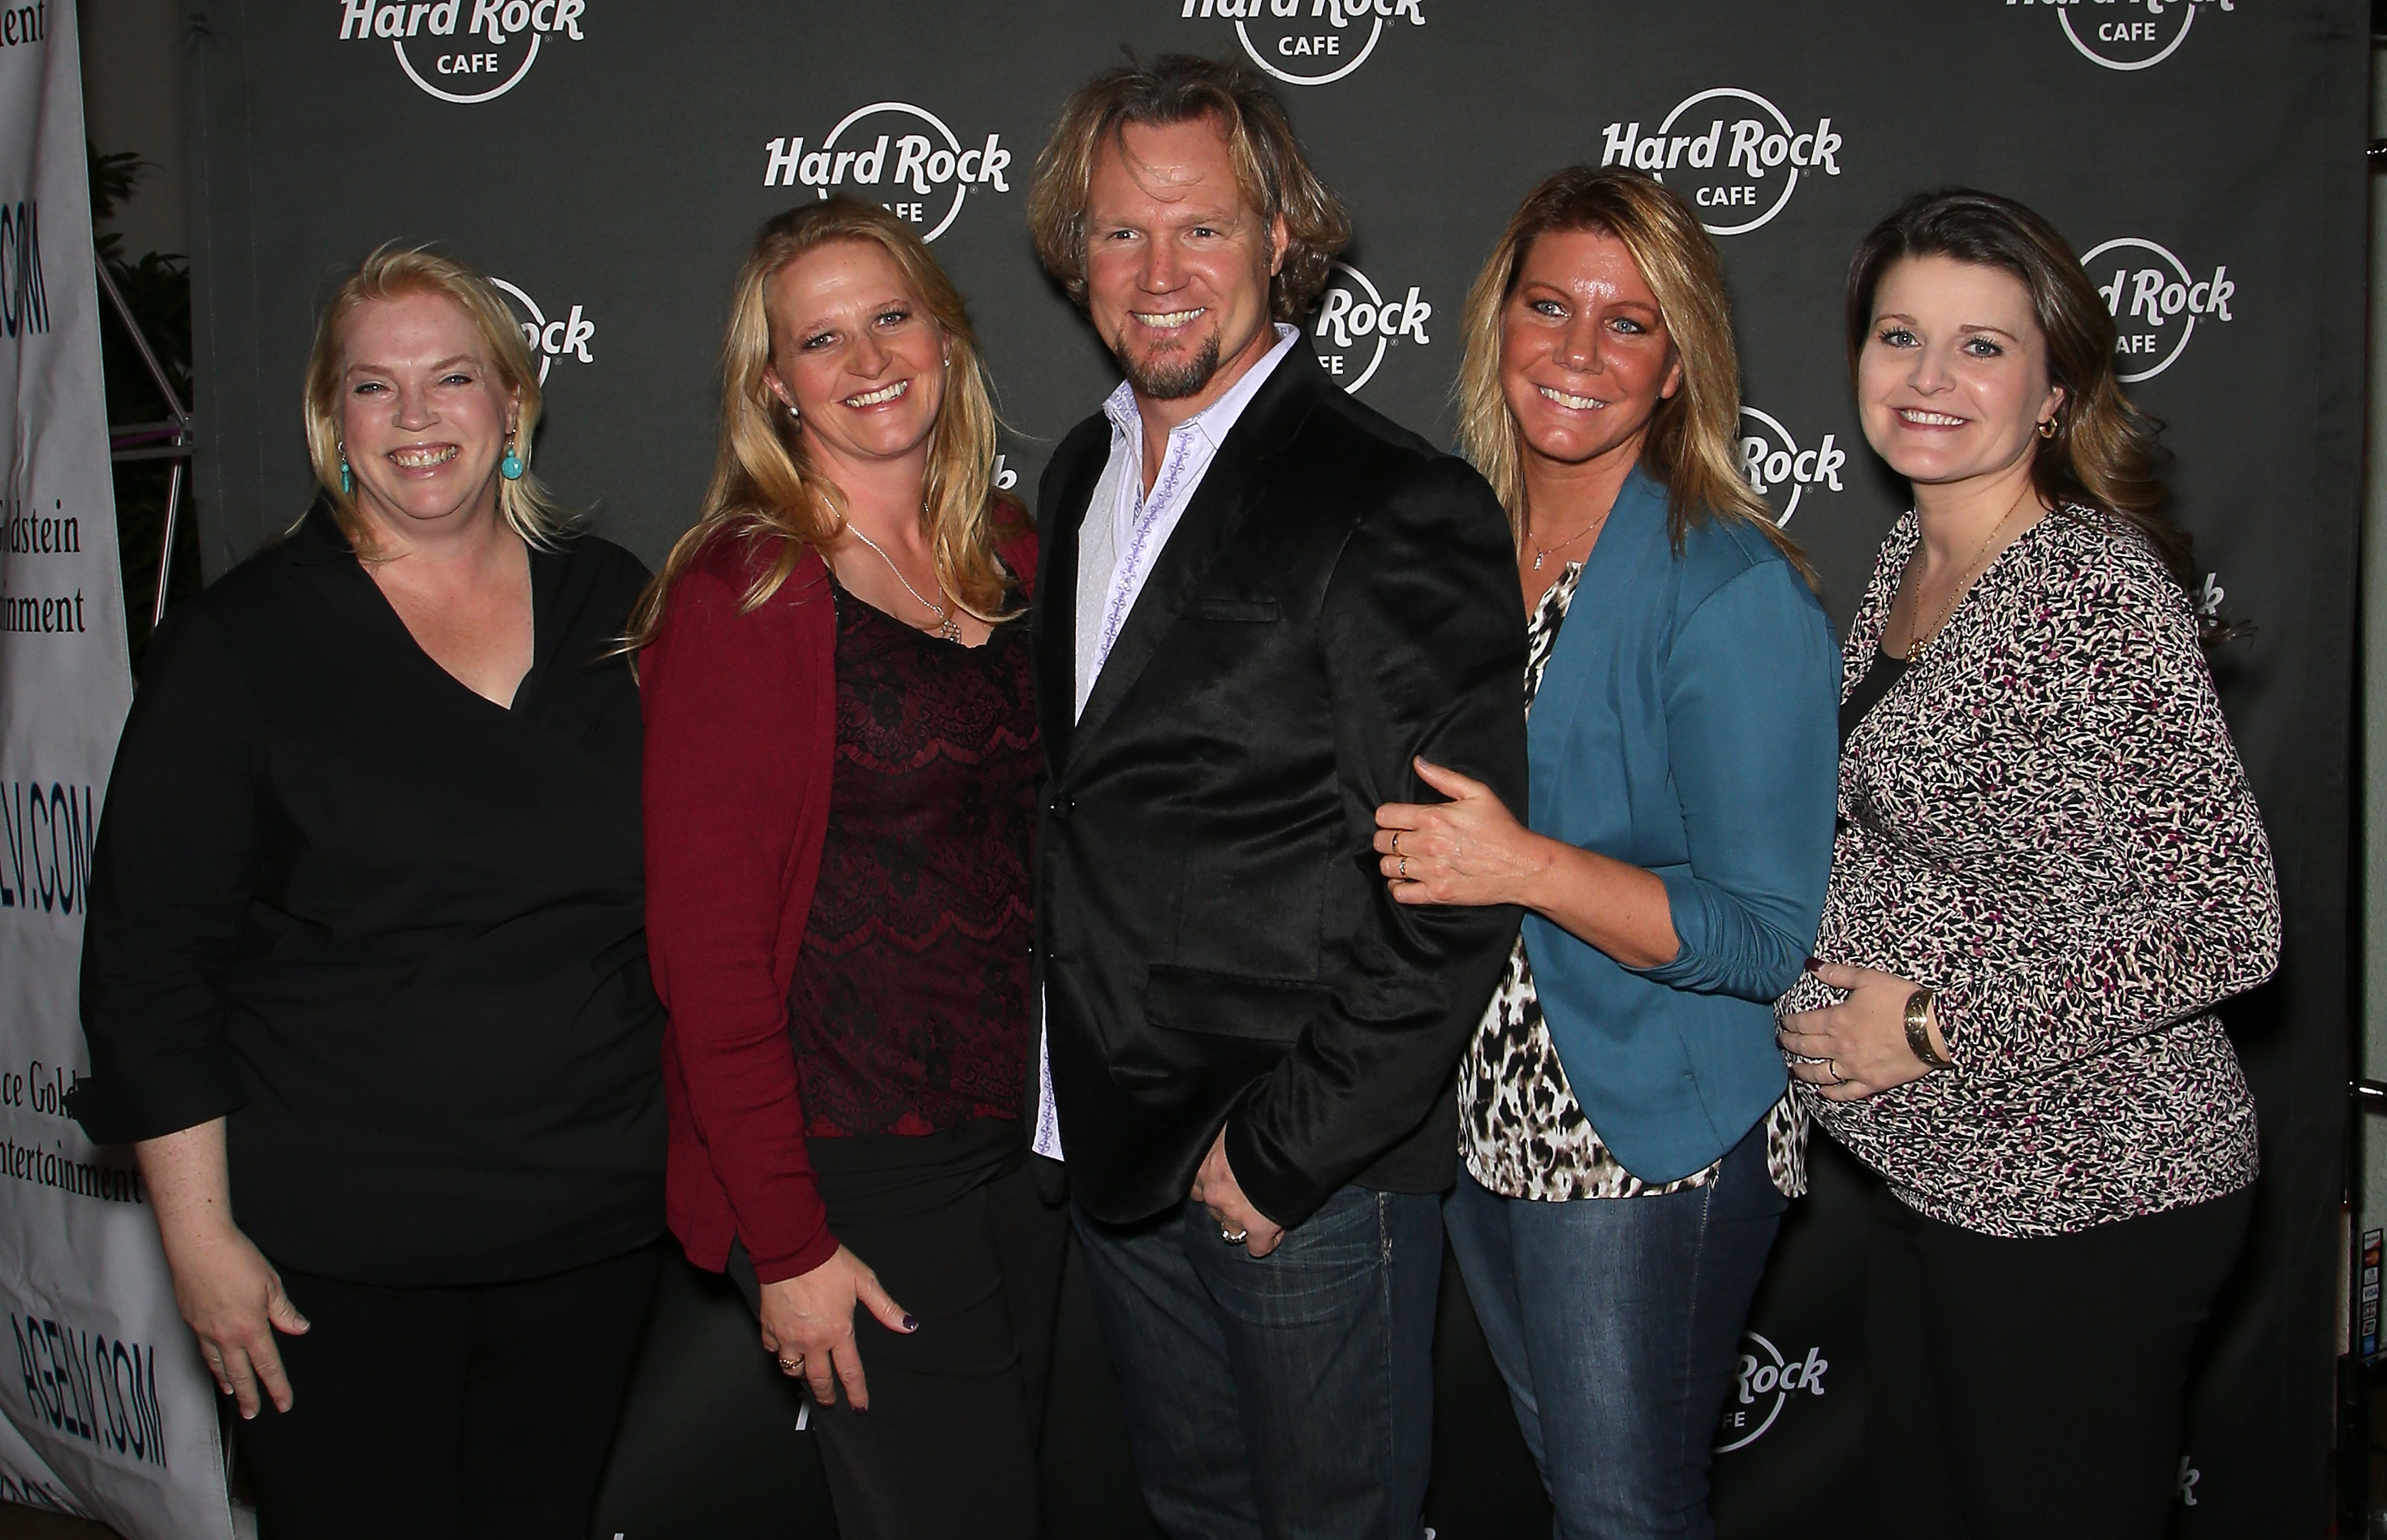 'Sister Wives' stars, Janelle Brown, Christine Brown, Kody Brown, Meri Brown and Robyn Brown attend a 25th anniversary celebration for Hard Rock Cafe in 2015